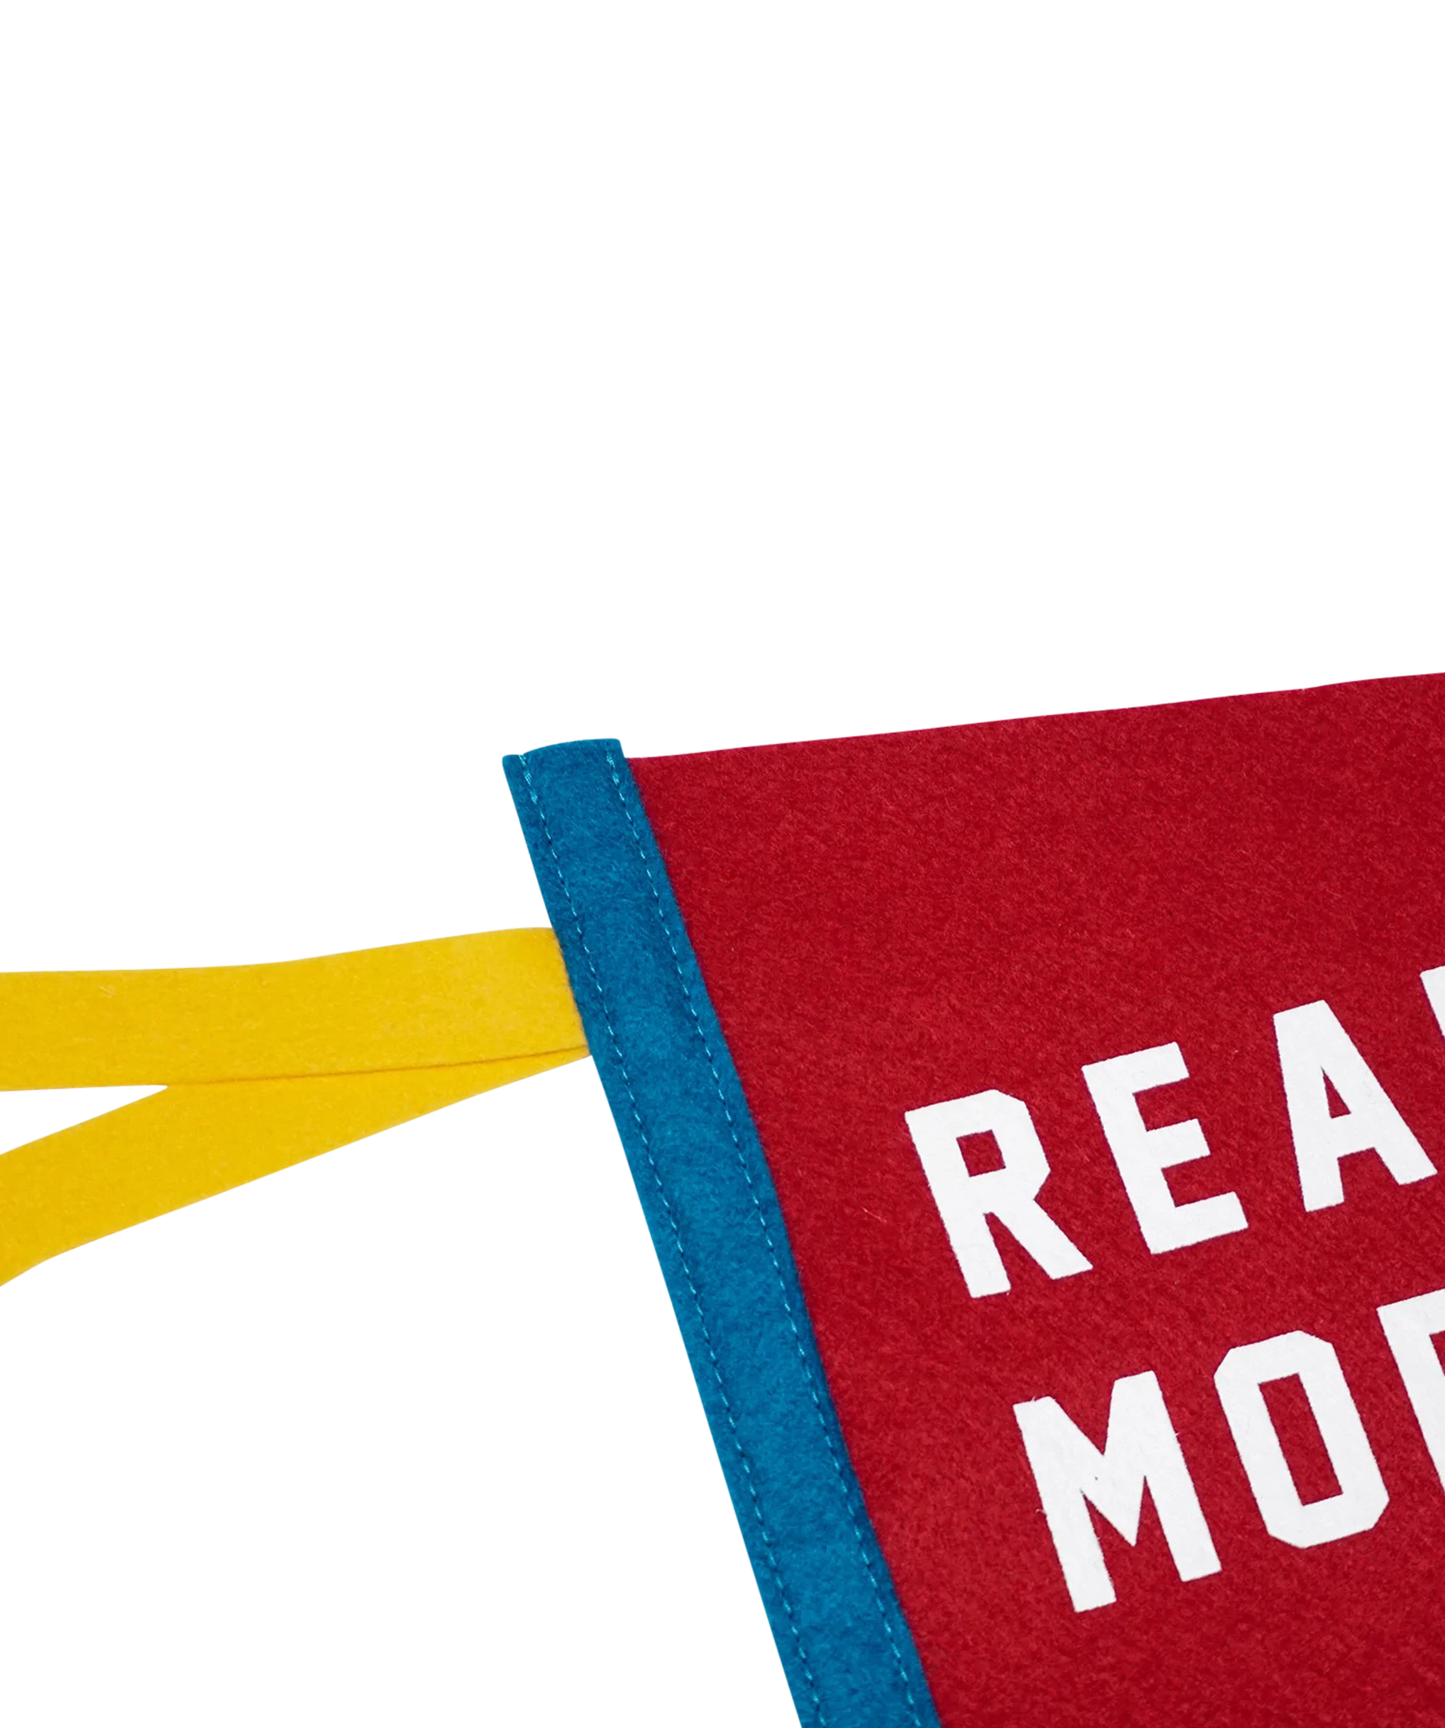 Read More Books Pennant